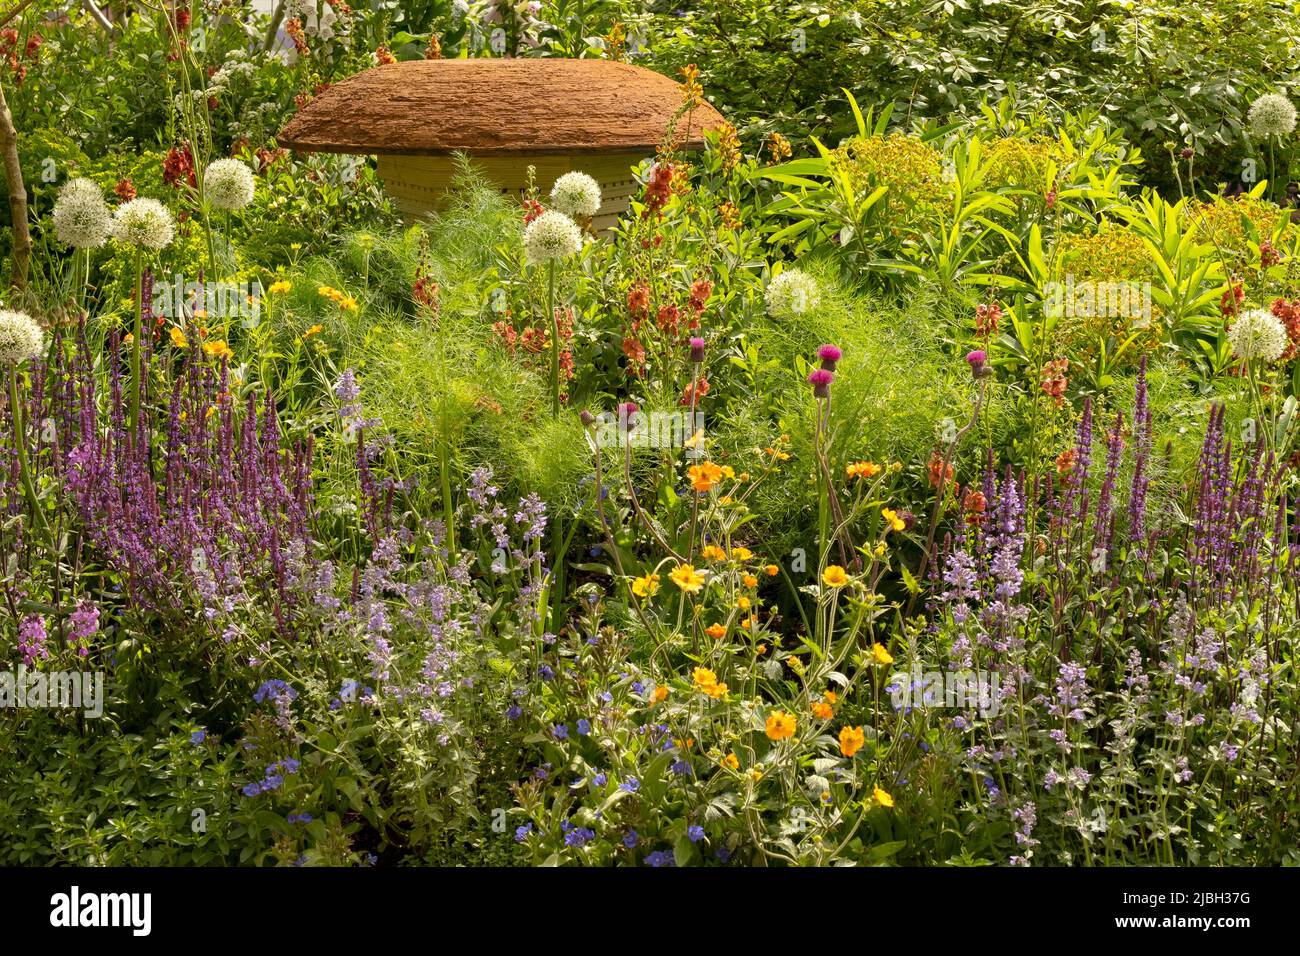 Plants surrounding a mushroom shaped bee house in the BBC Studios Our Green Planet & RHS Bee Garden.  Plants include Salvia nemeros ‘Caradonna’, Geum Stock Photo